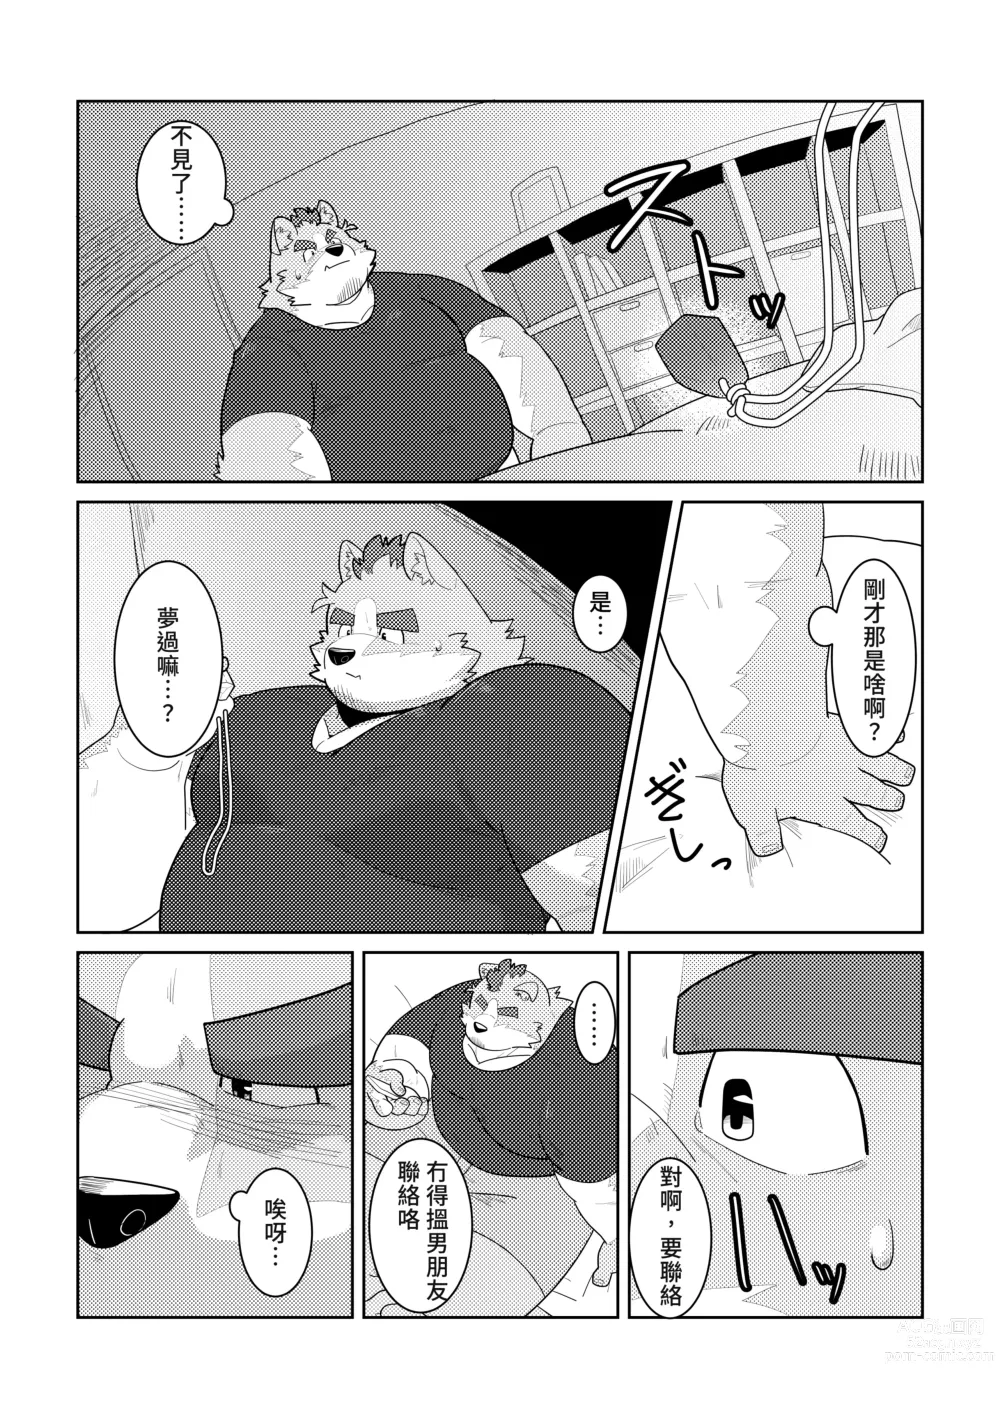 Page 10 of doujinshi 幽靈戀人